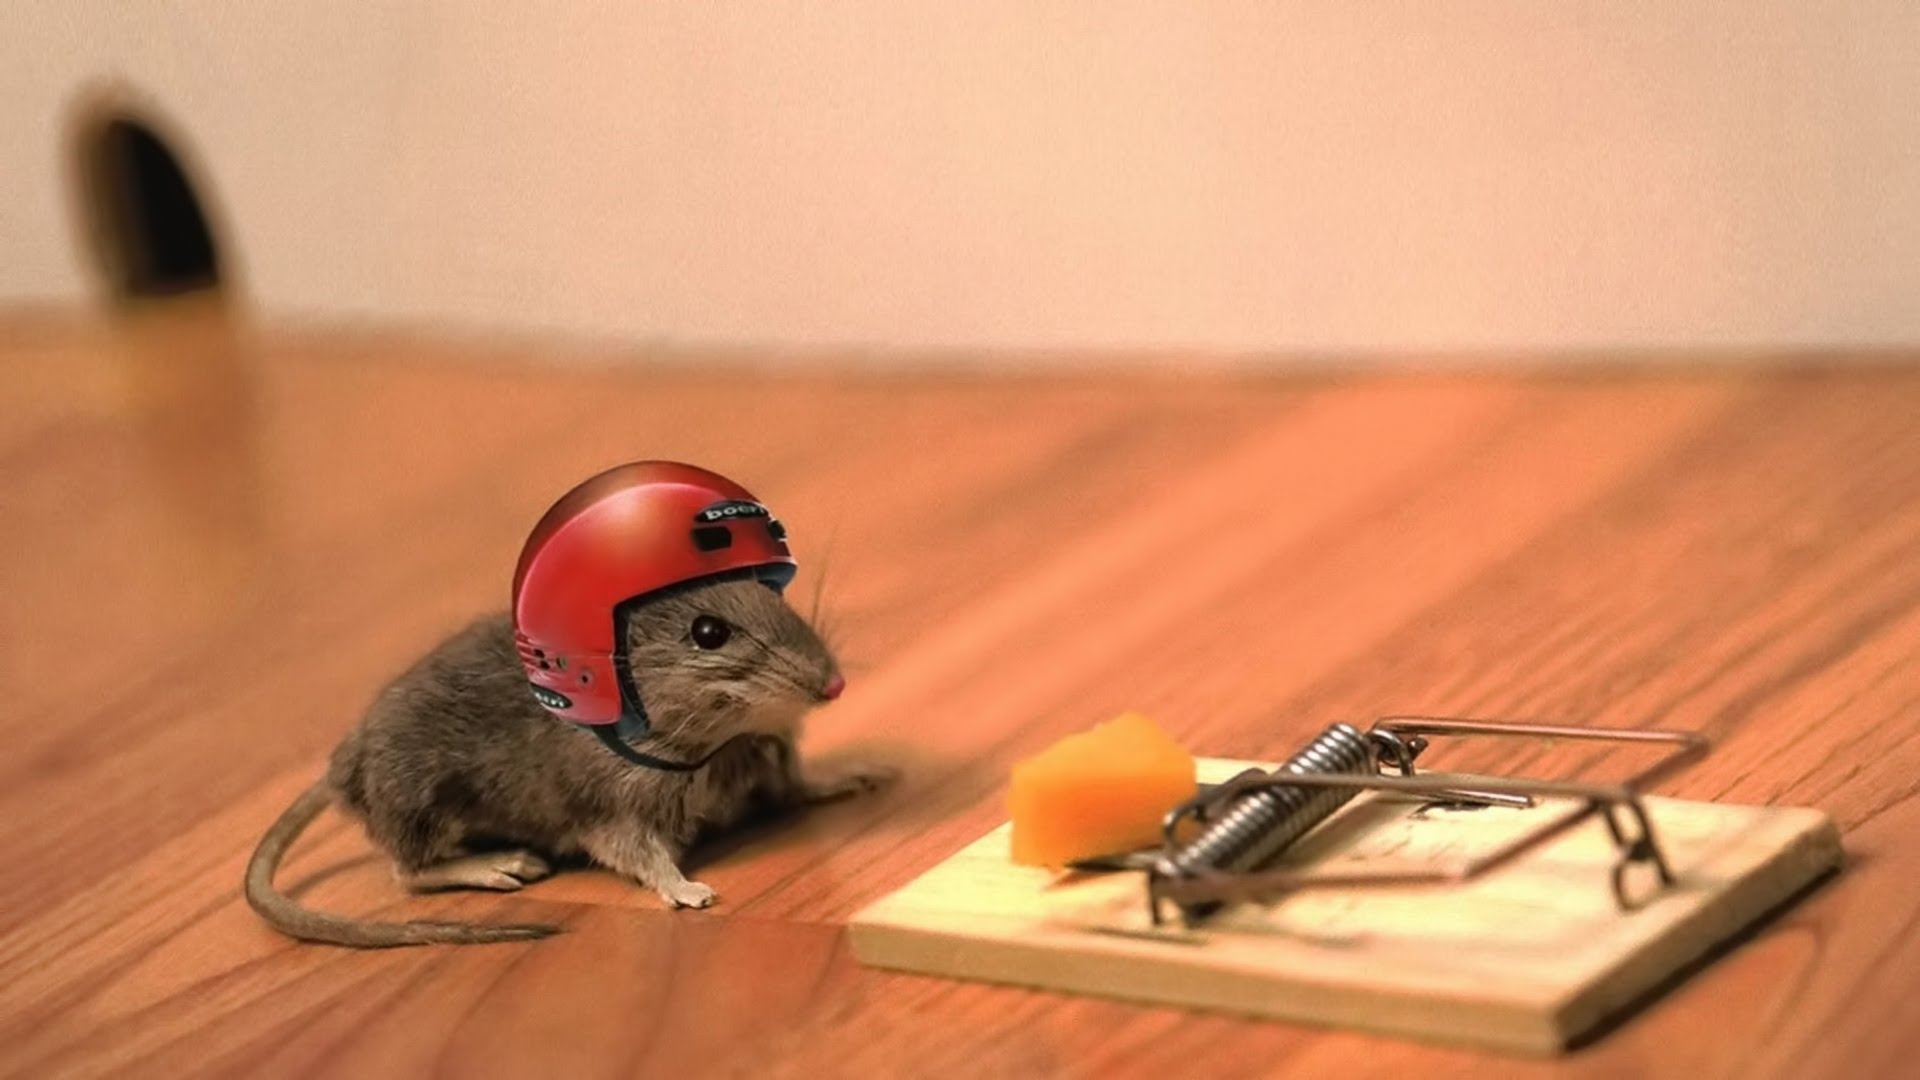 How to Make an Emergency Mouse Trap (Humane, No-Kill) - YouTube